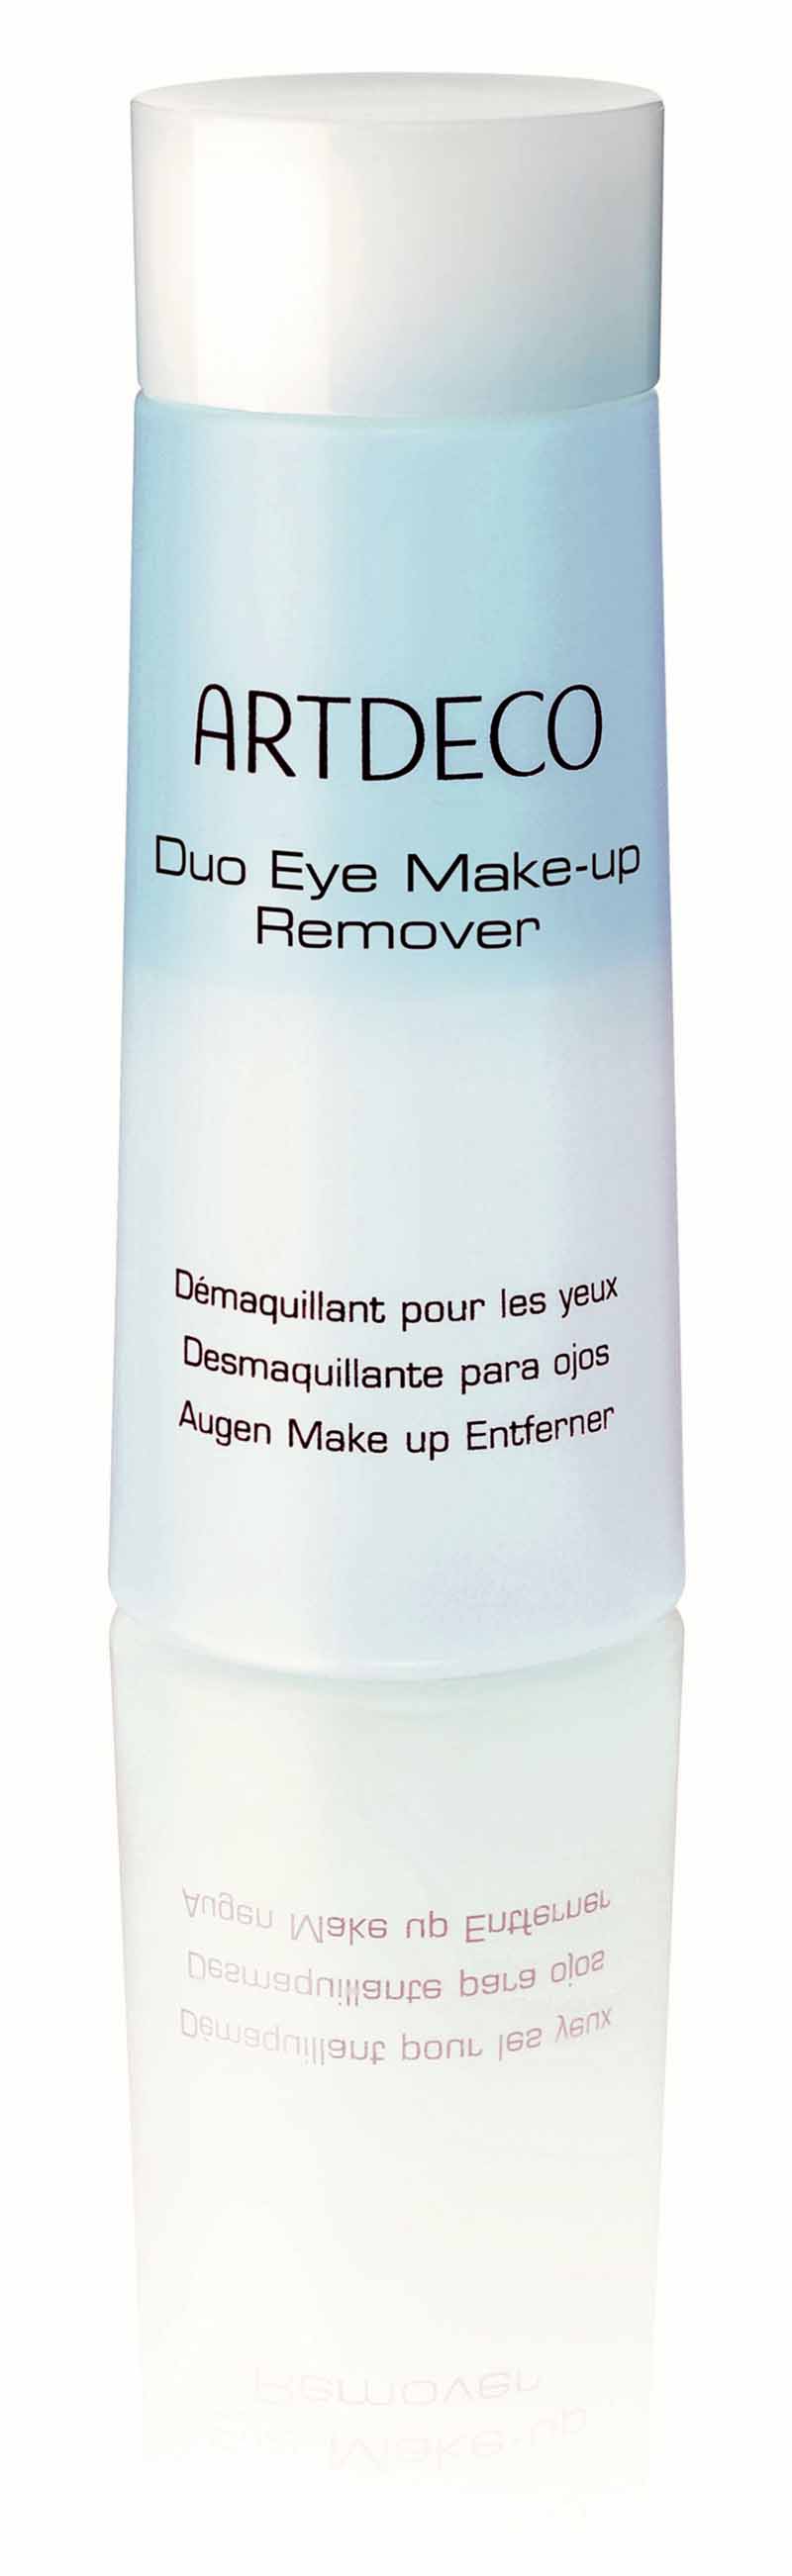 Duo Eye Make-Up Remover